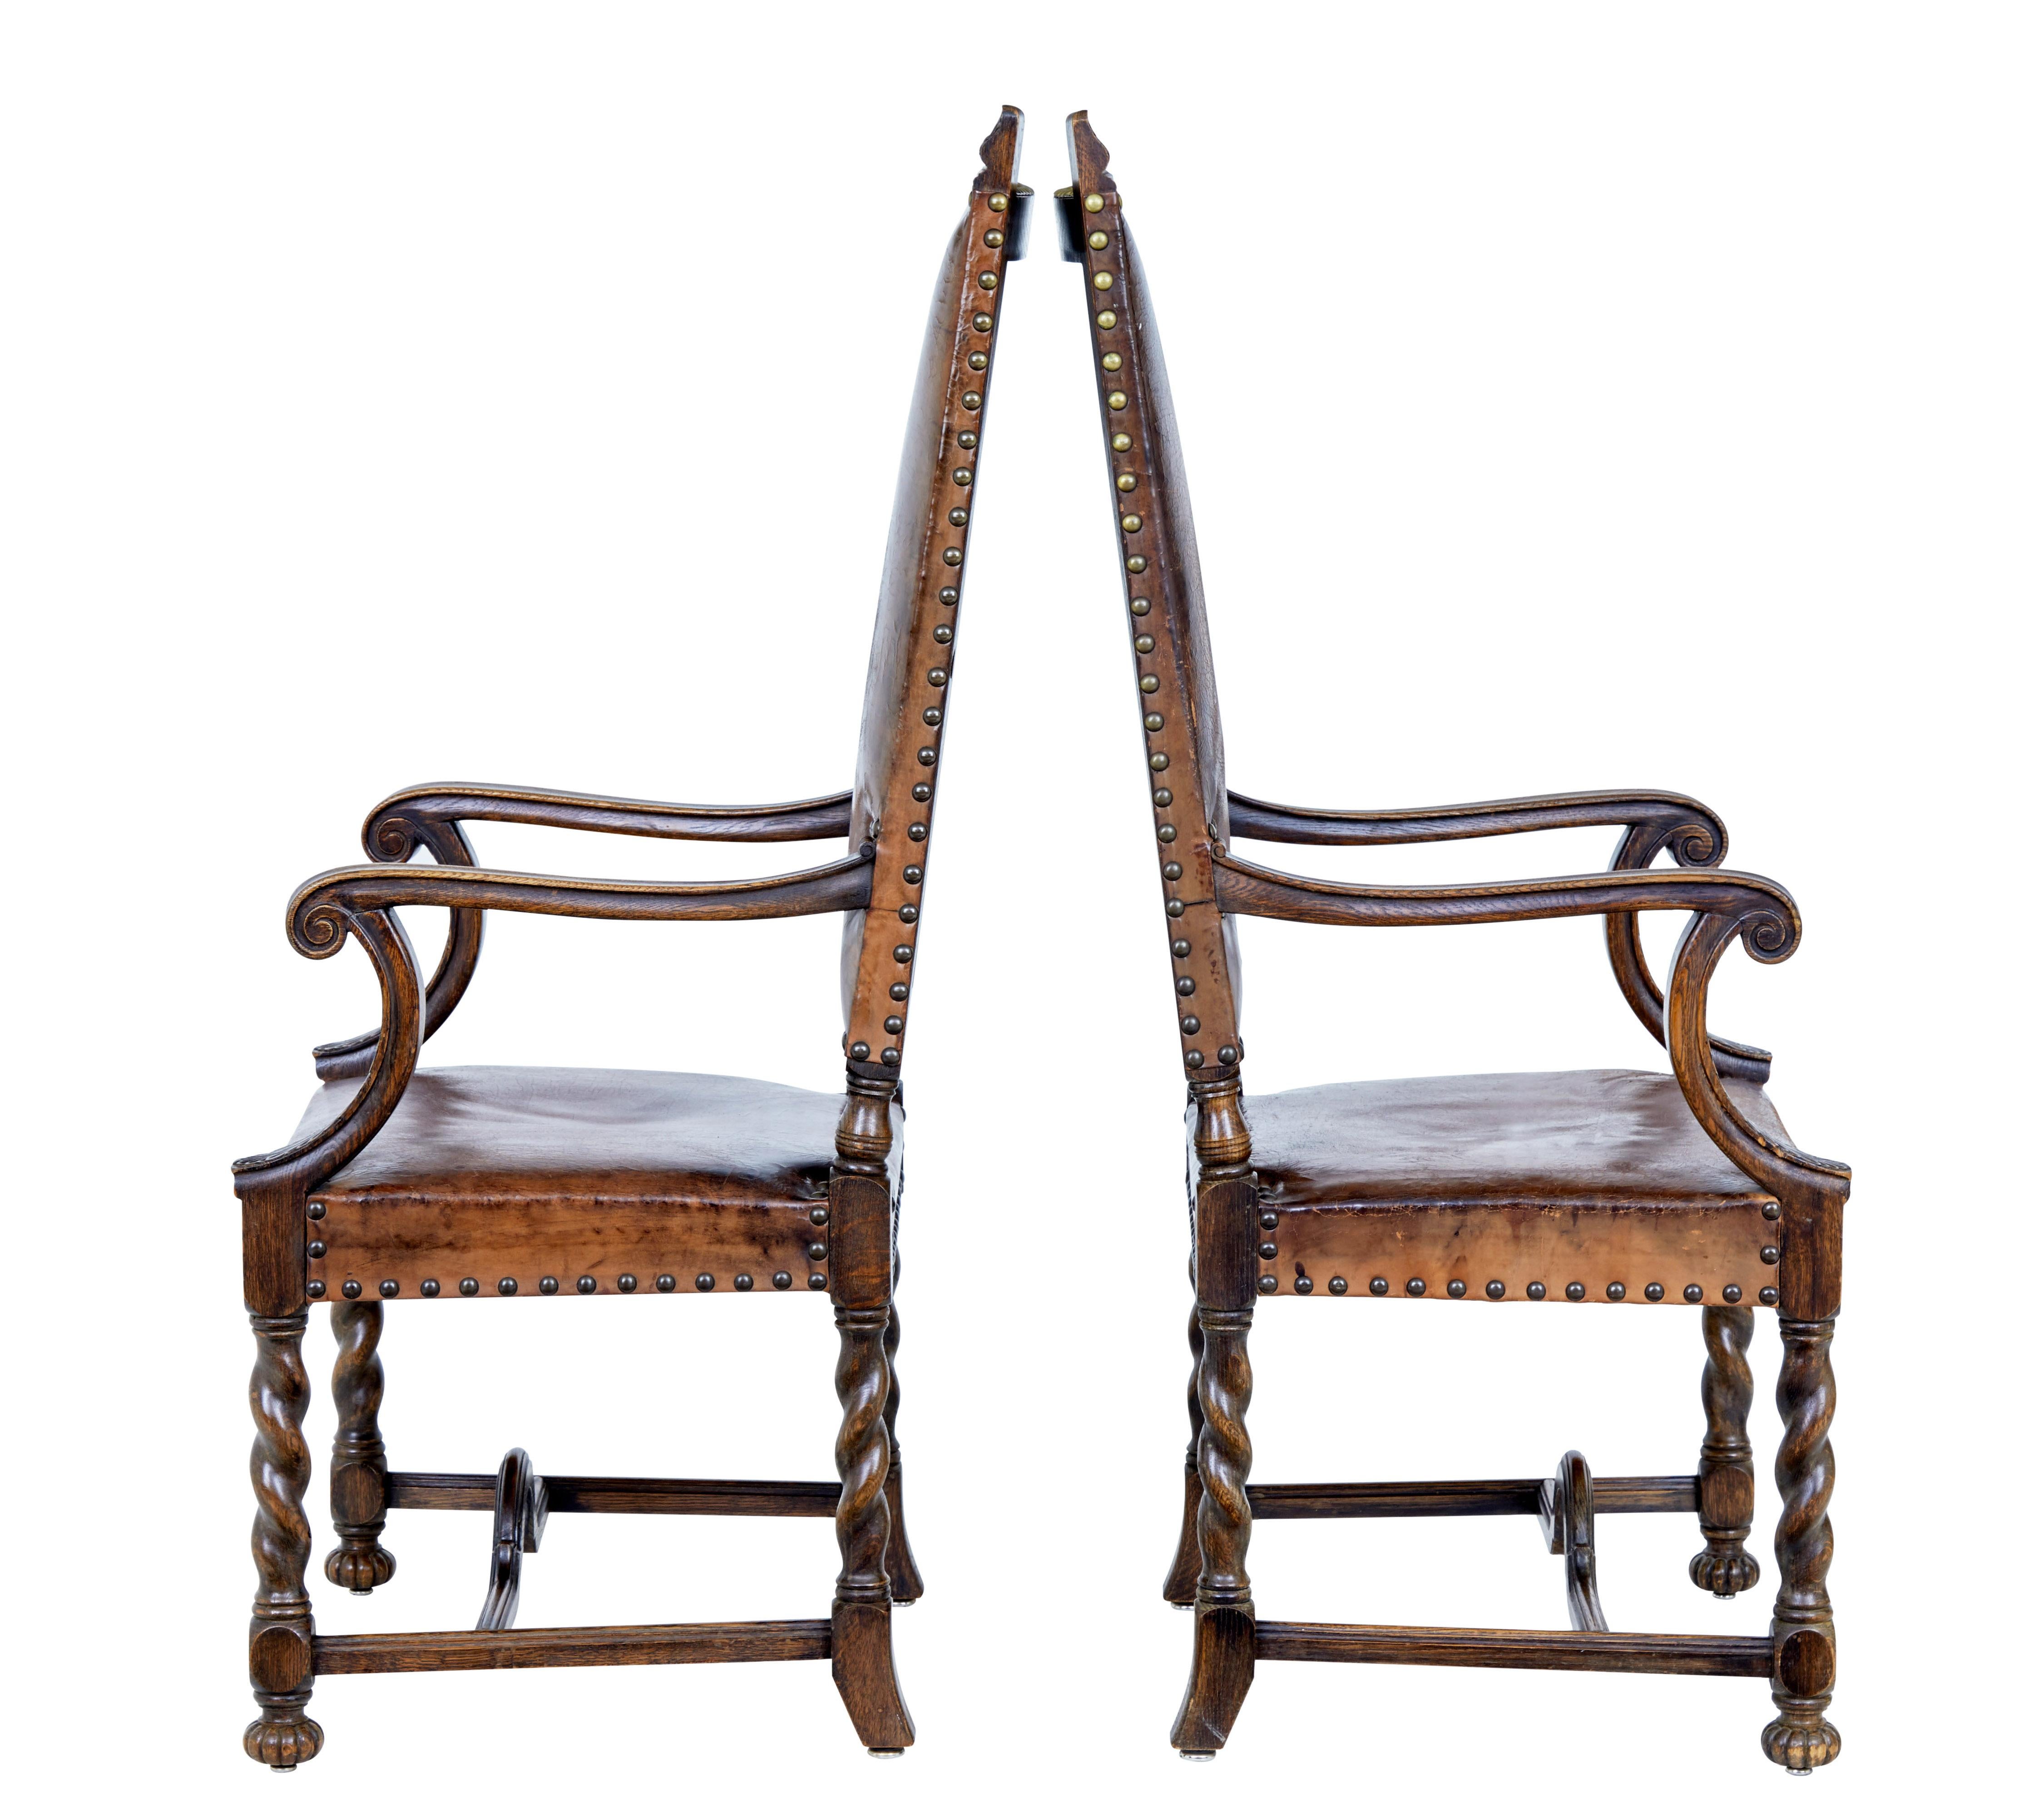 Imposing pair of high back carved oak armchairs, circa 1880.

Dark oak which has taken on great patina along with the original leather. Carved scrolling arms supported by an acanthus leaf detail. Standing on barley twist legs united by a horseshoe